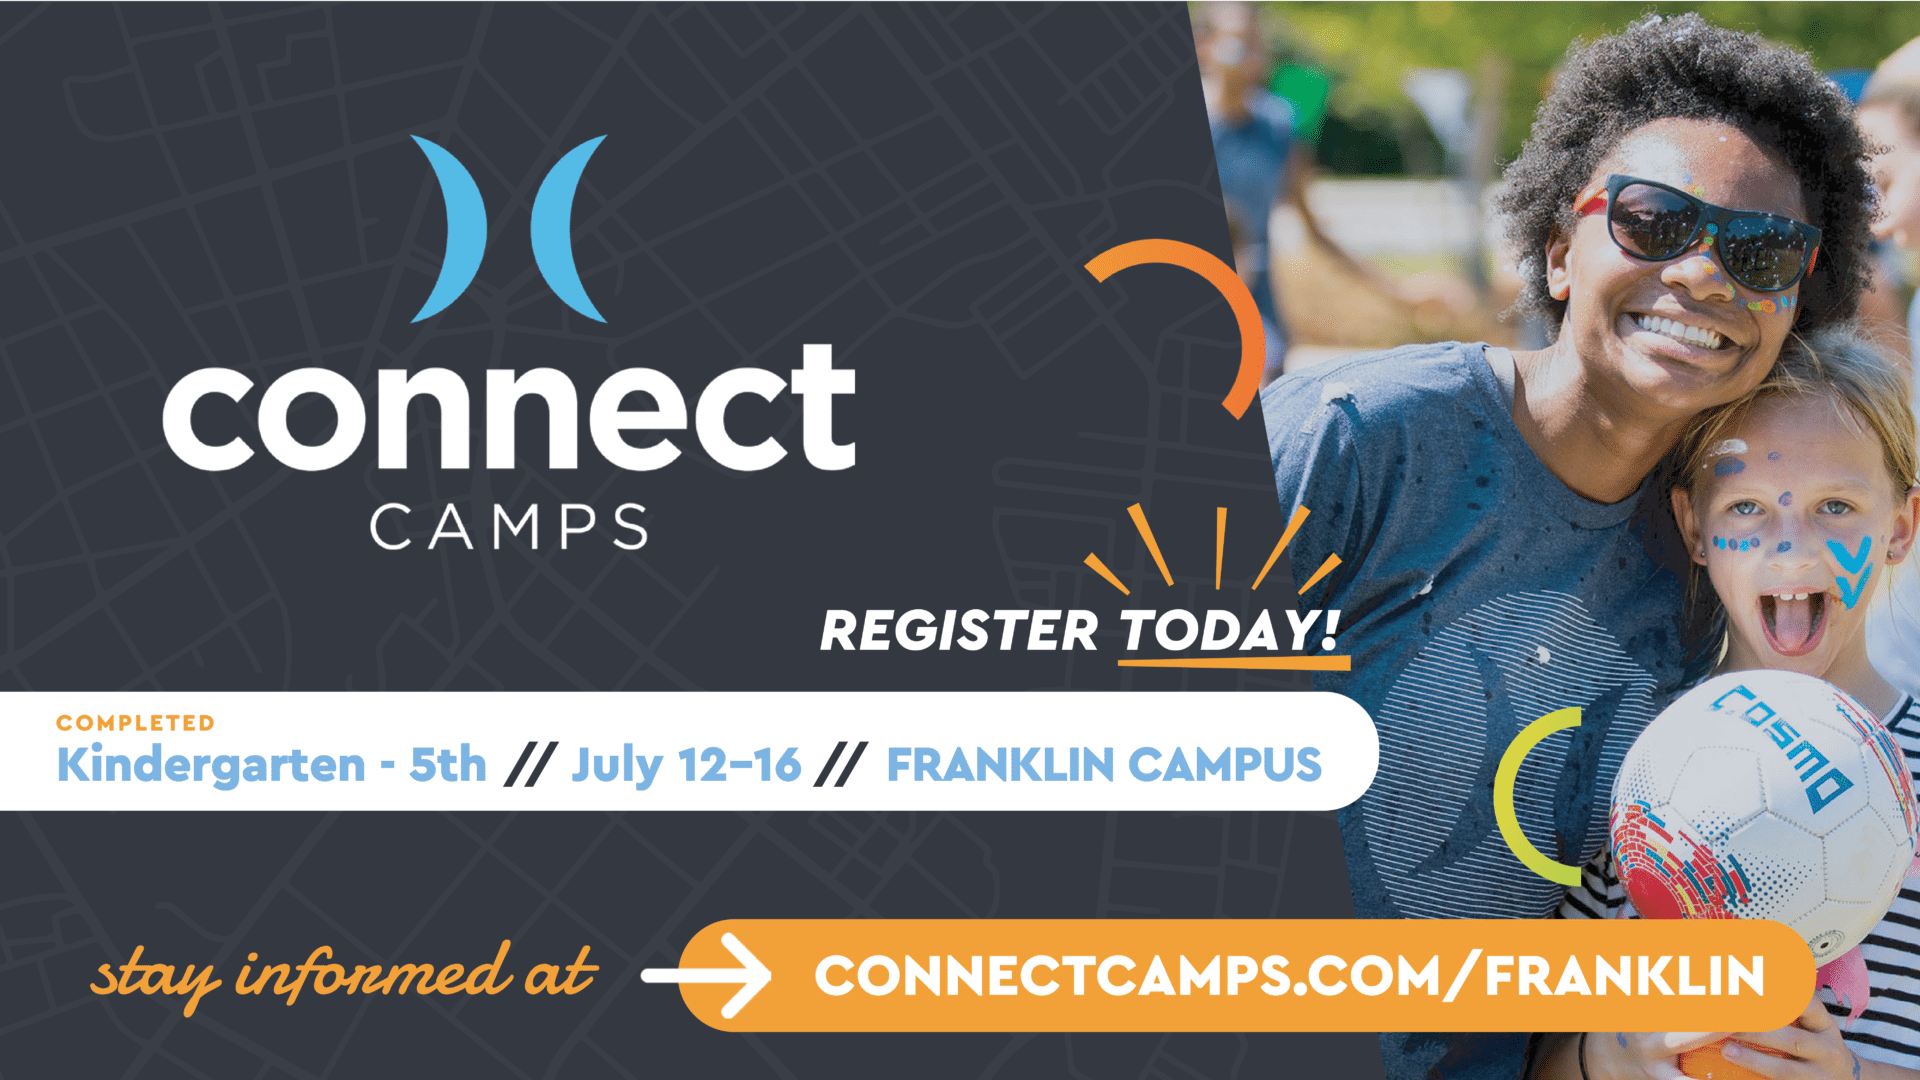 Connect Camps, day camps for kids in Franklin, TN, kids activities, filled with non-stop fun, engaging activities, daily faith-based lessons, and the chance to make lasting friendships.